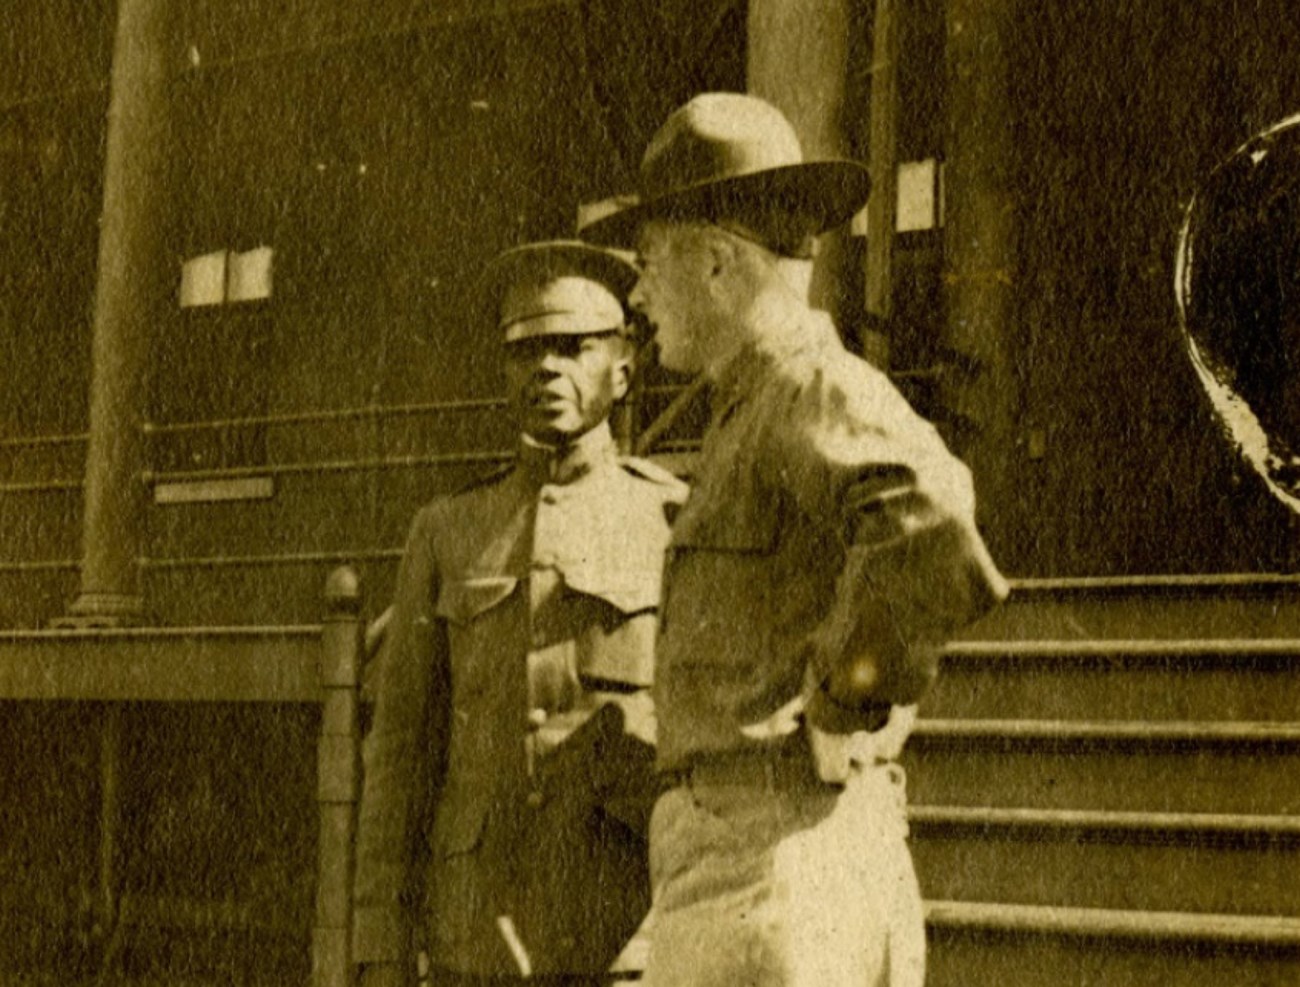 Black and white photo of African American Army officer walking downstairs passing a white Officer. Both men are wearing World War One style uniforms and hats.